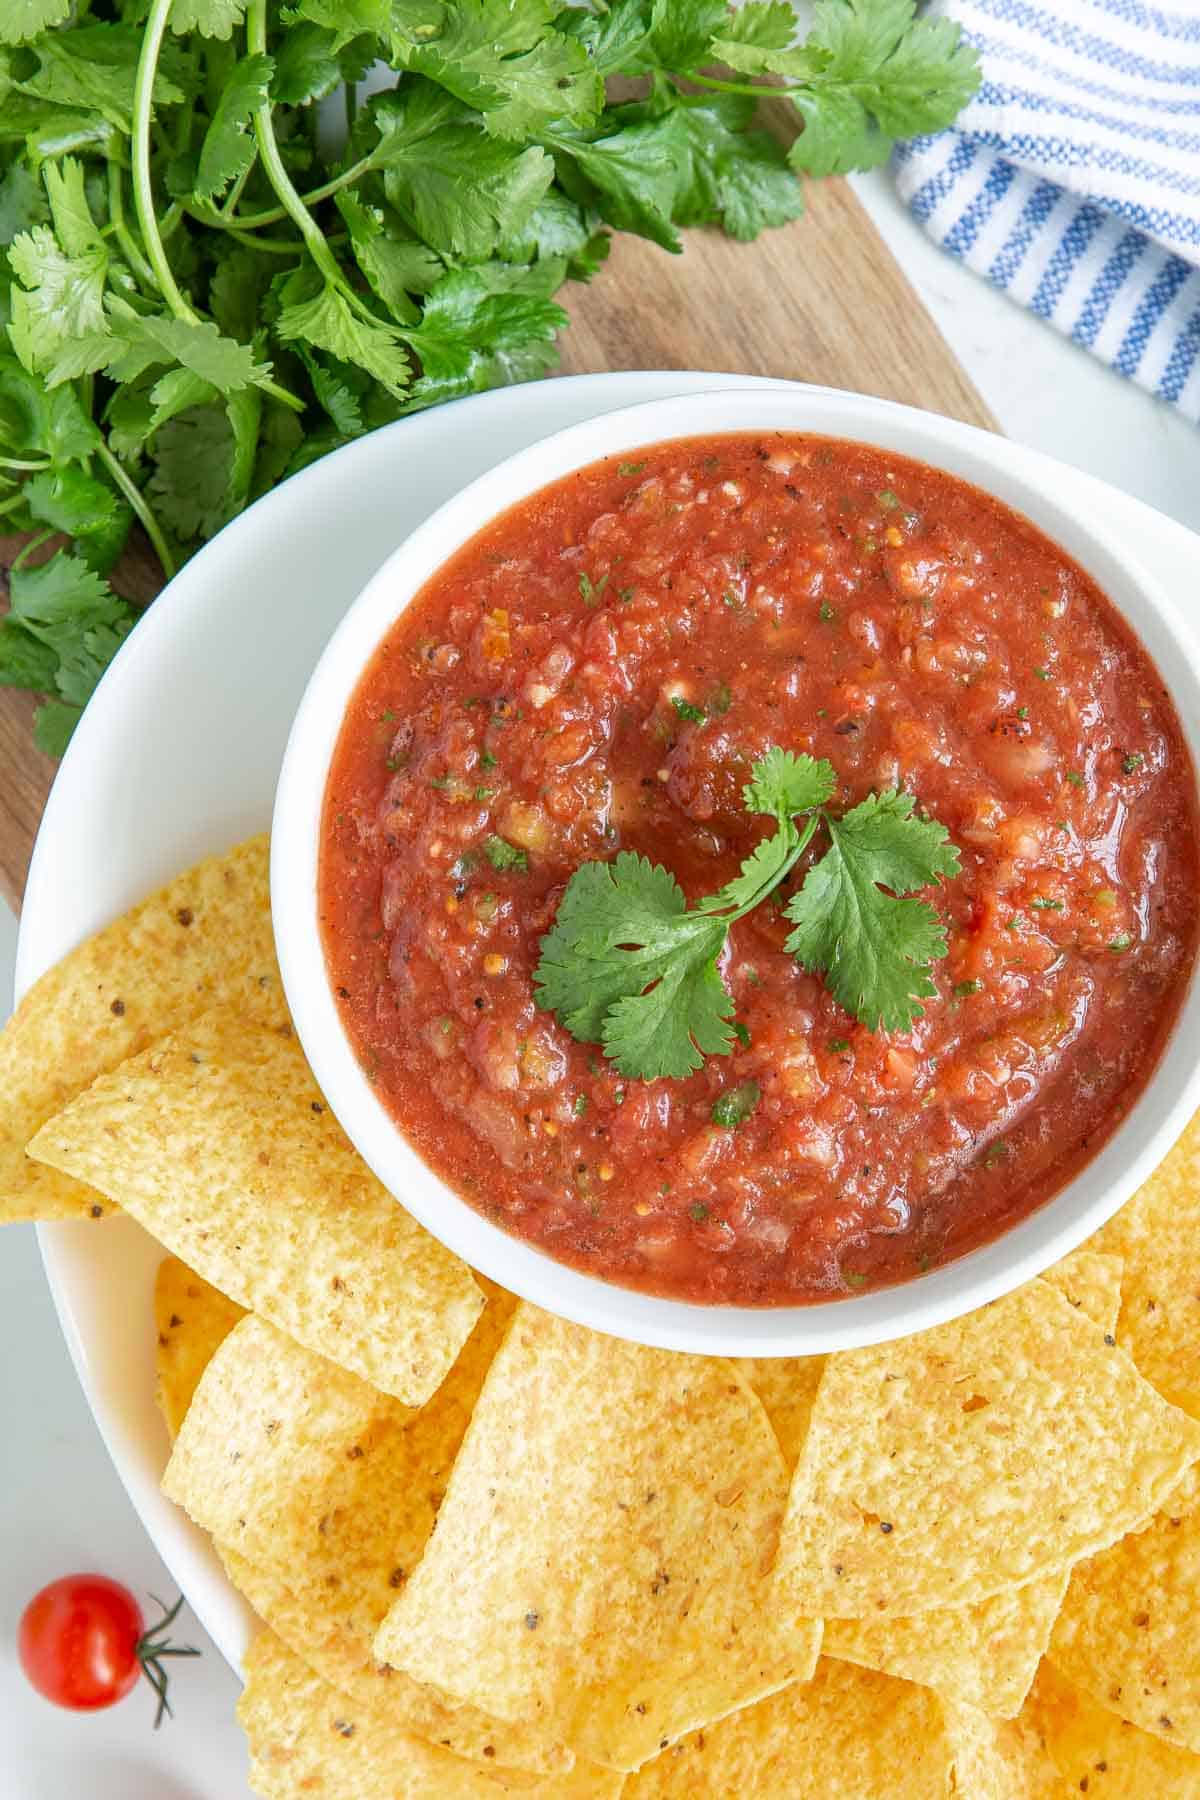 Overhead view of blender salsa in a white bowl surrounded by tortilla chips.